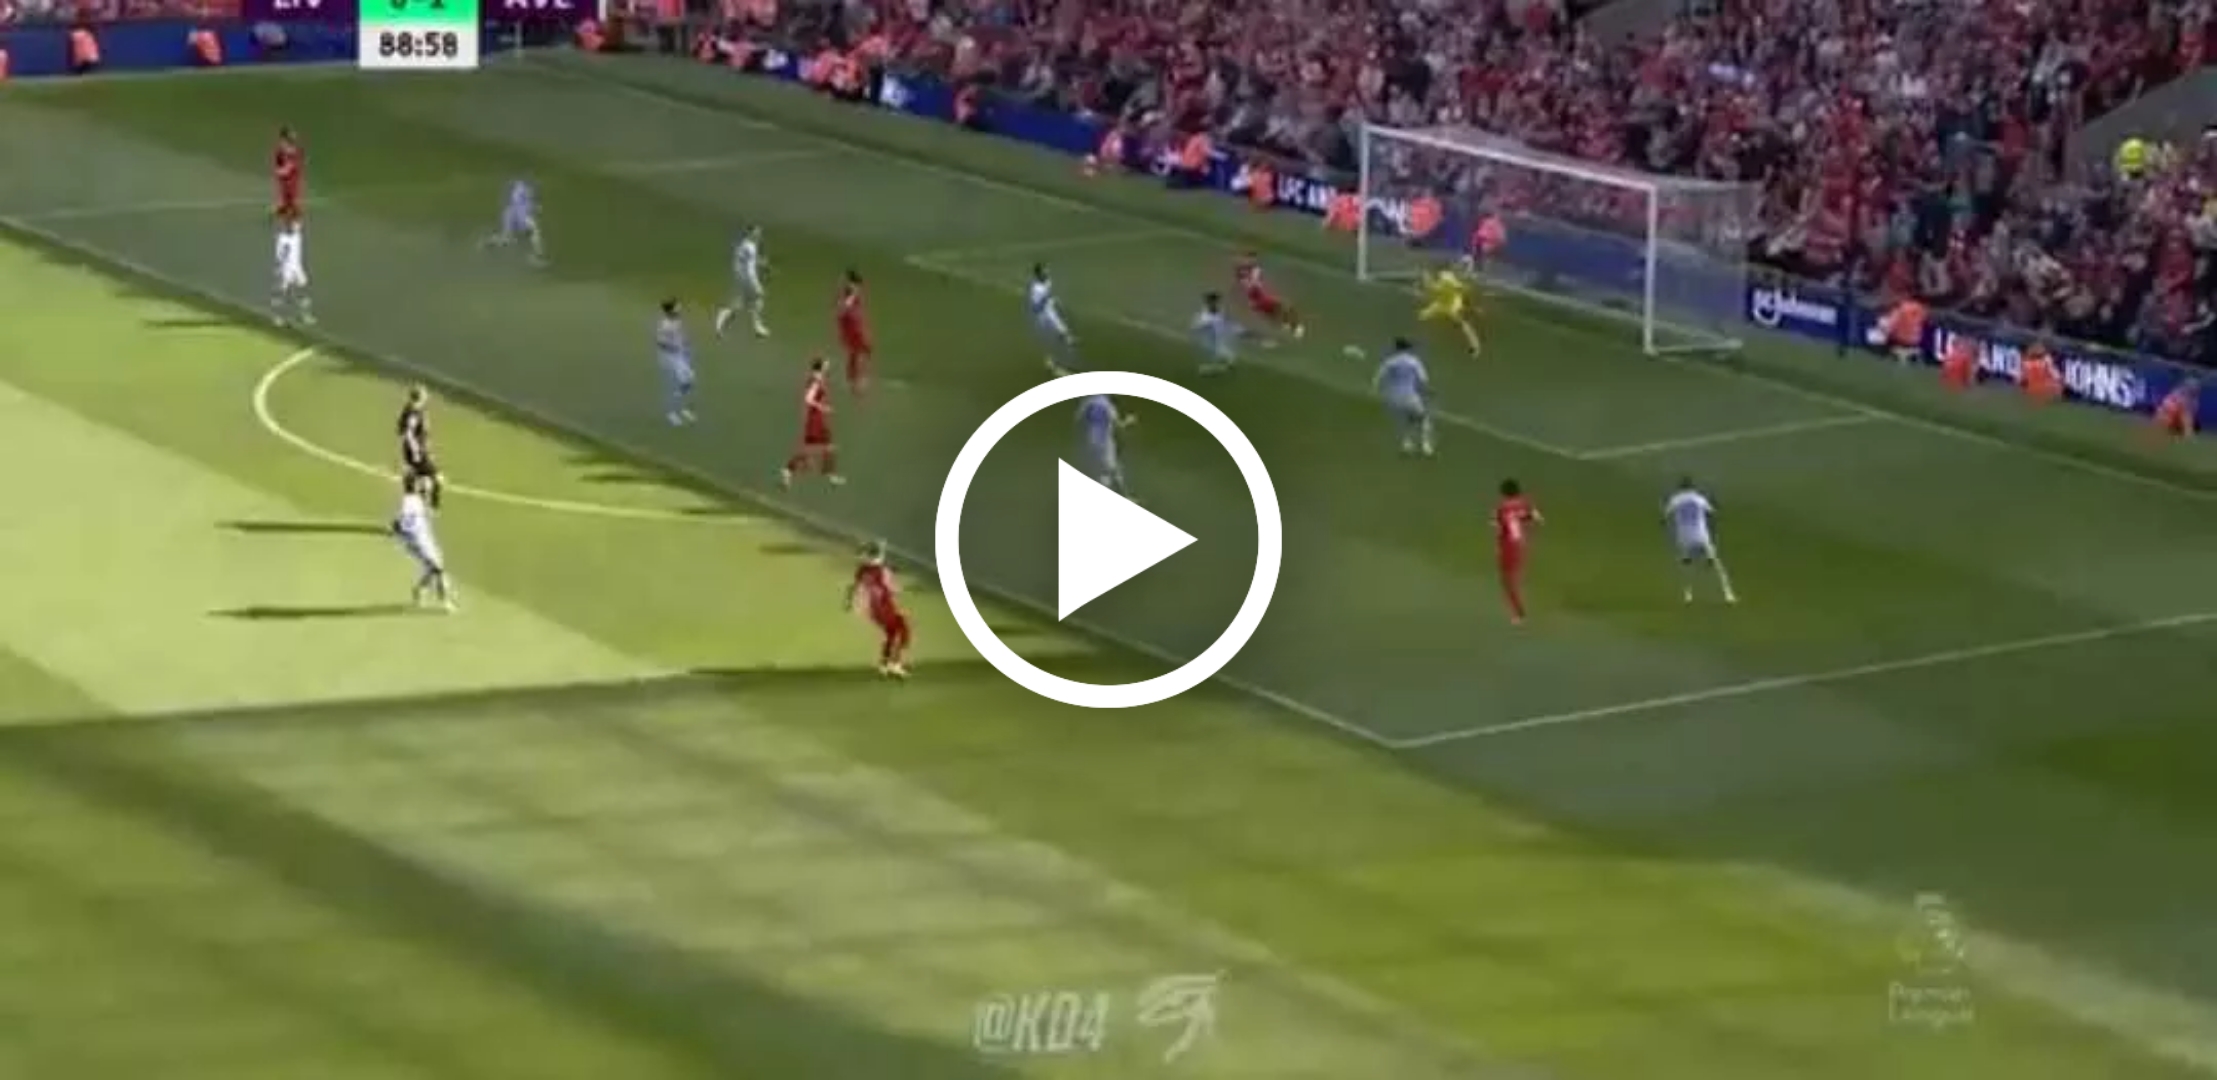 (Video) Watch: Roberto Firmino comes on to score a crucial goal for Liverpool in his last game at Anfield 1 Sportelo